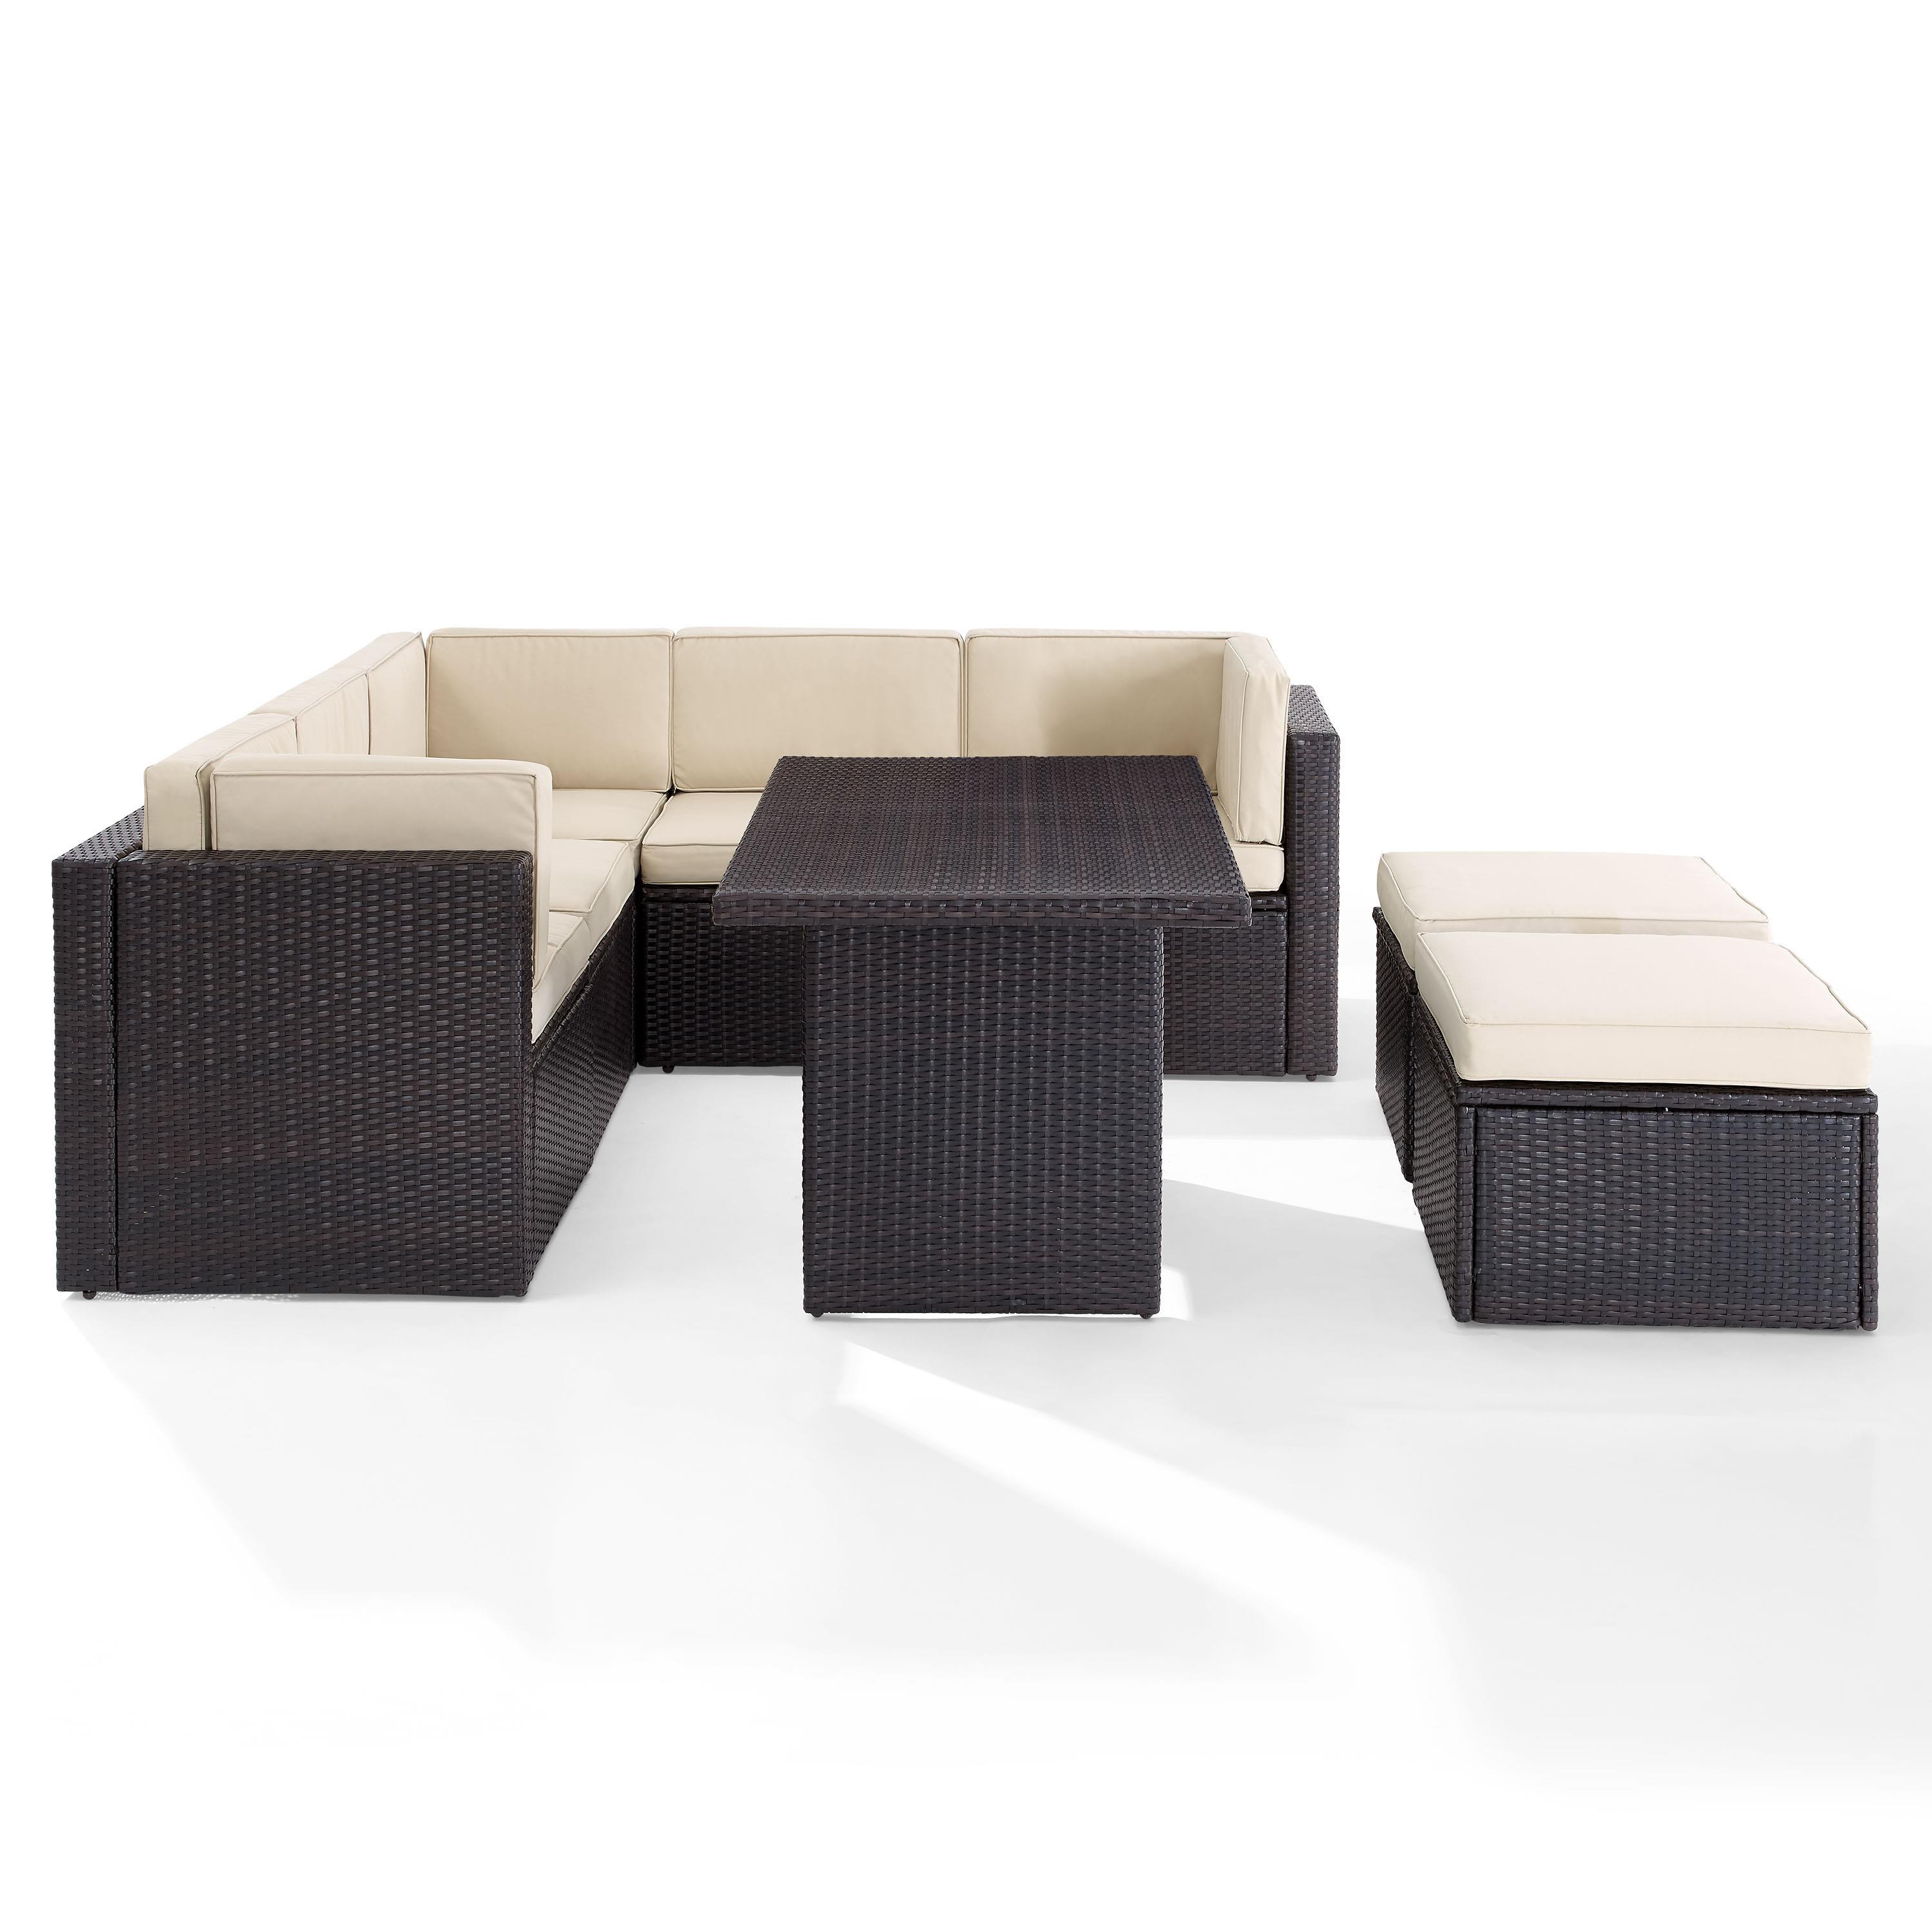 Crosley Palm Harbor 8Pc Outdoor Wicker Sectional Set- 3 Corner Chairs, 2 Center Chairs, 2 Ottomans, Cocktail Table - image 4 of 10